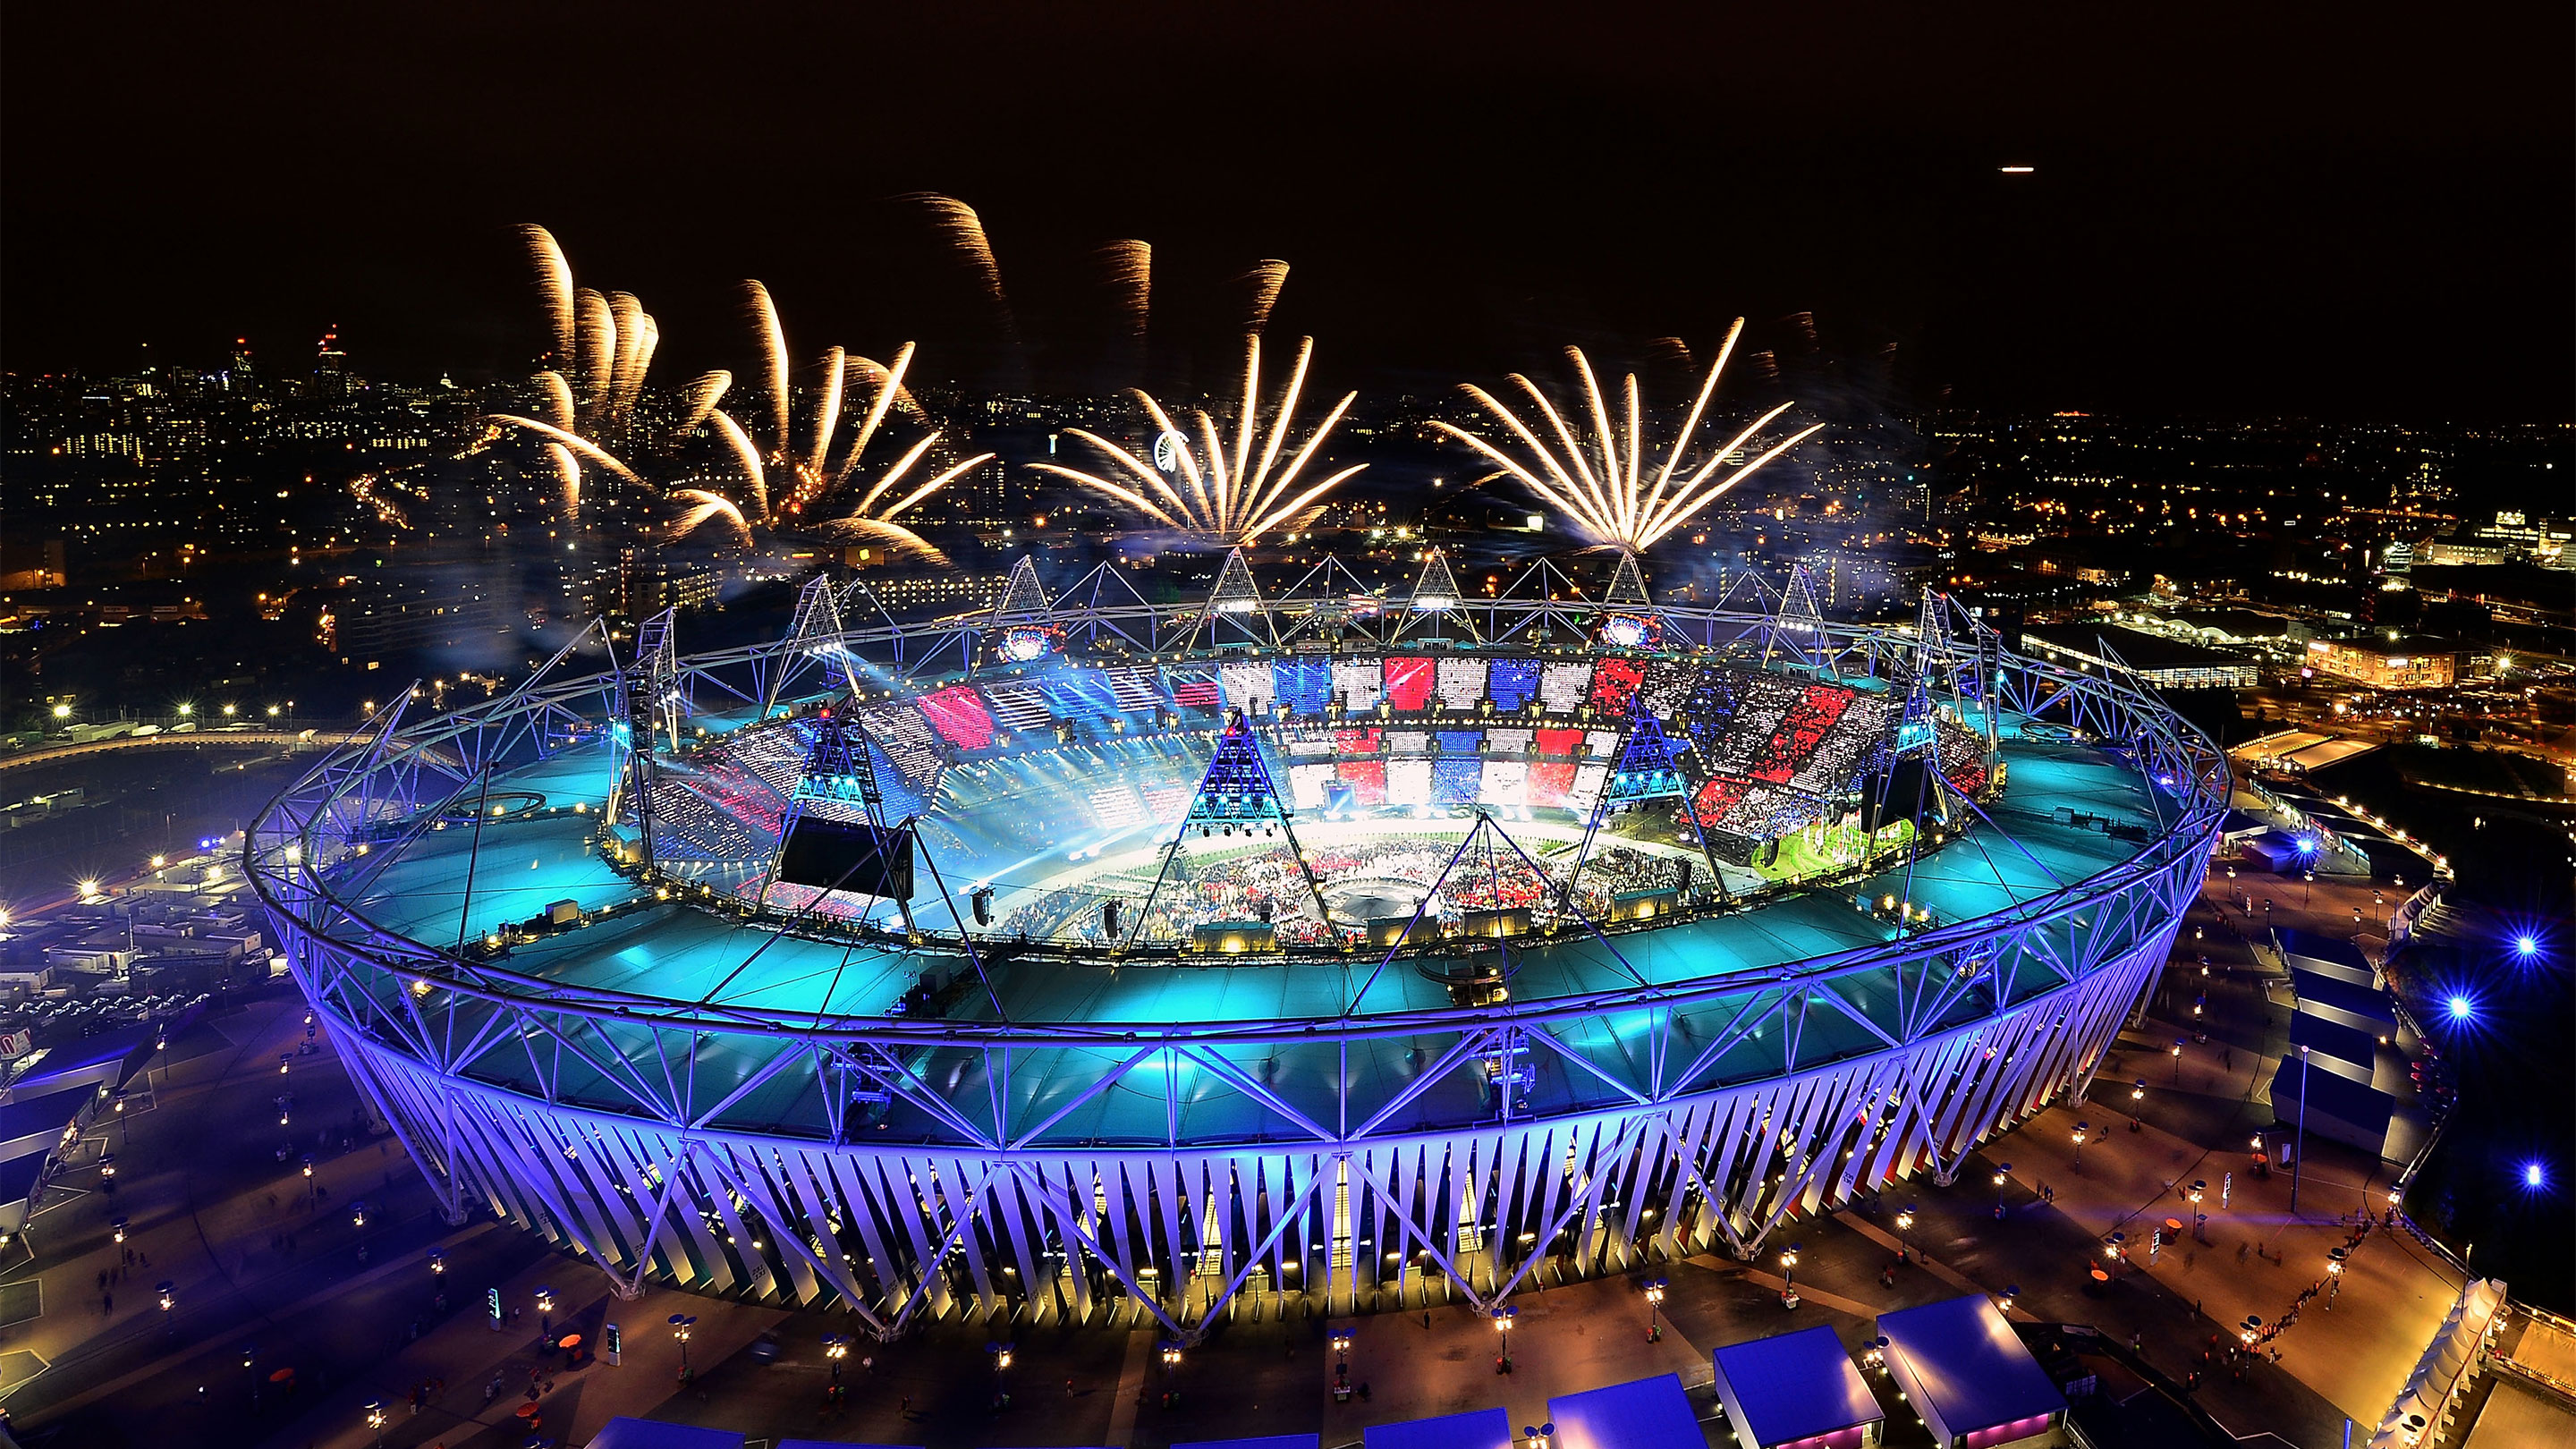 London is Chosen to Host the 2012 Olympics